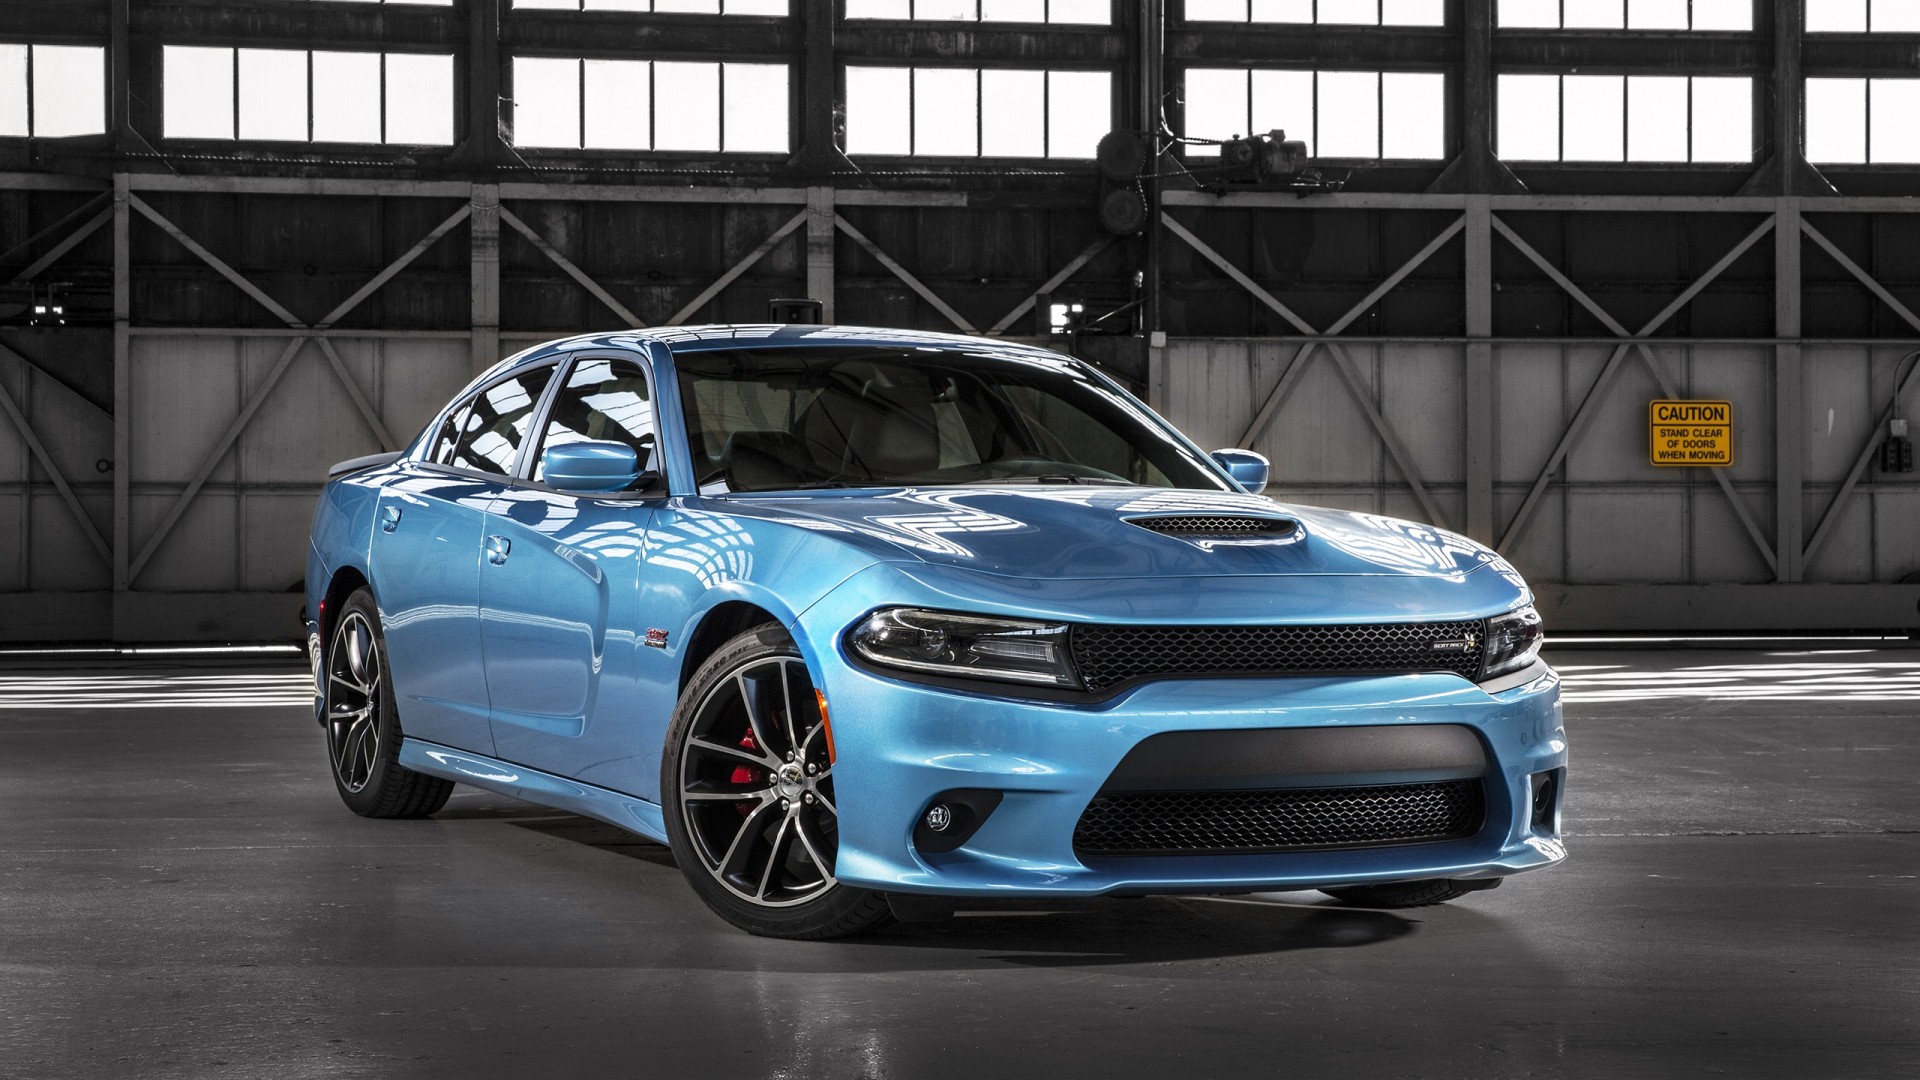 2015 Dodge Charger RT Scat Pack Wallpaper | HD Car Wallpapers | ID #4914